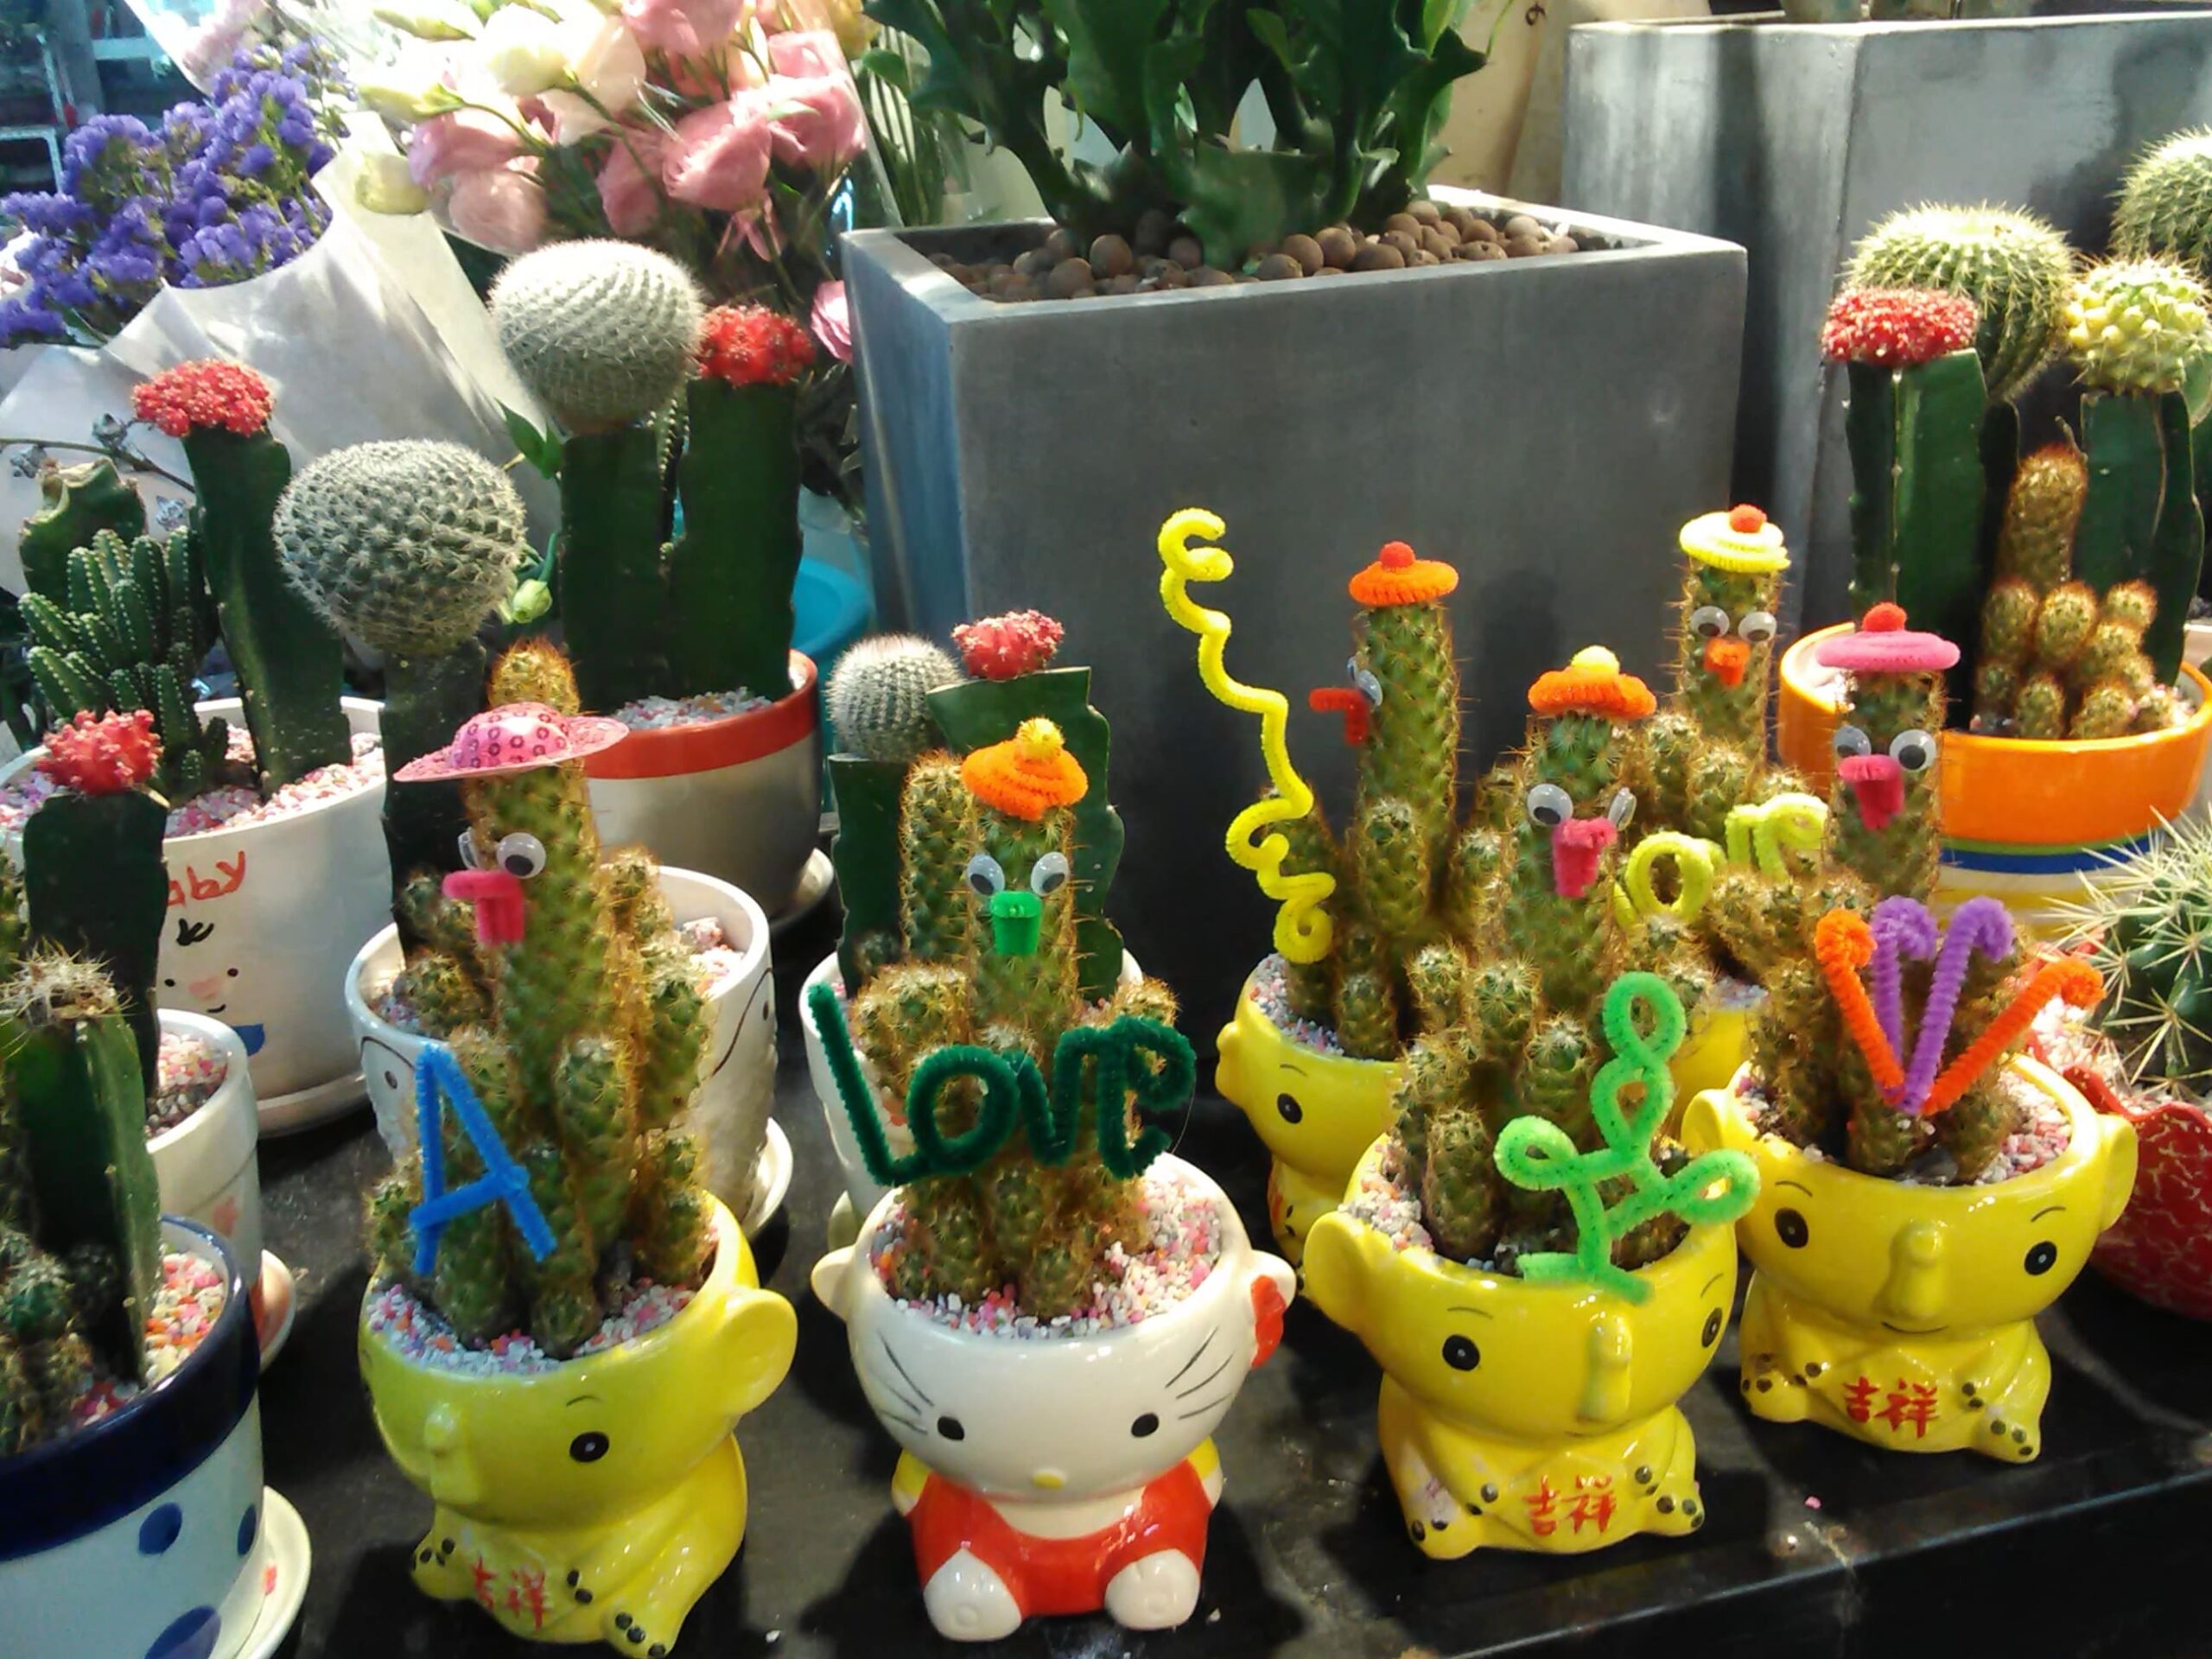 The cactus and succulents